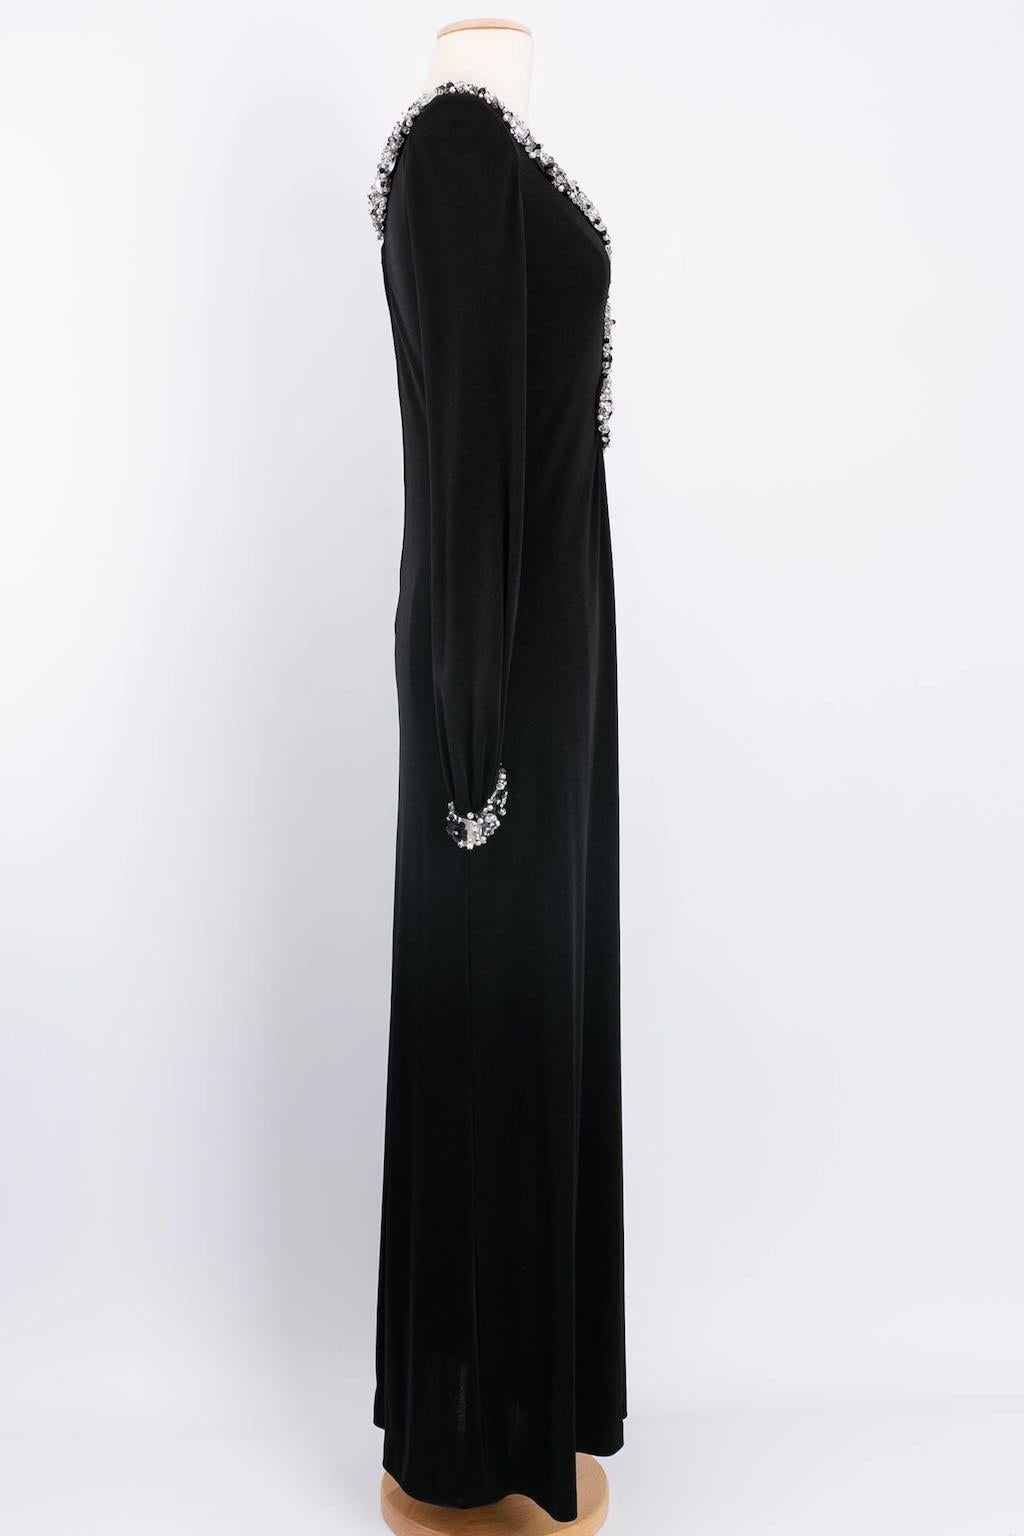 Women's Loris Azzaro Black and Silver Embroidered Viscose Dress For Sale